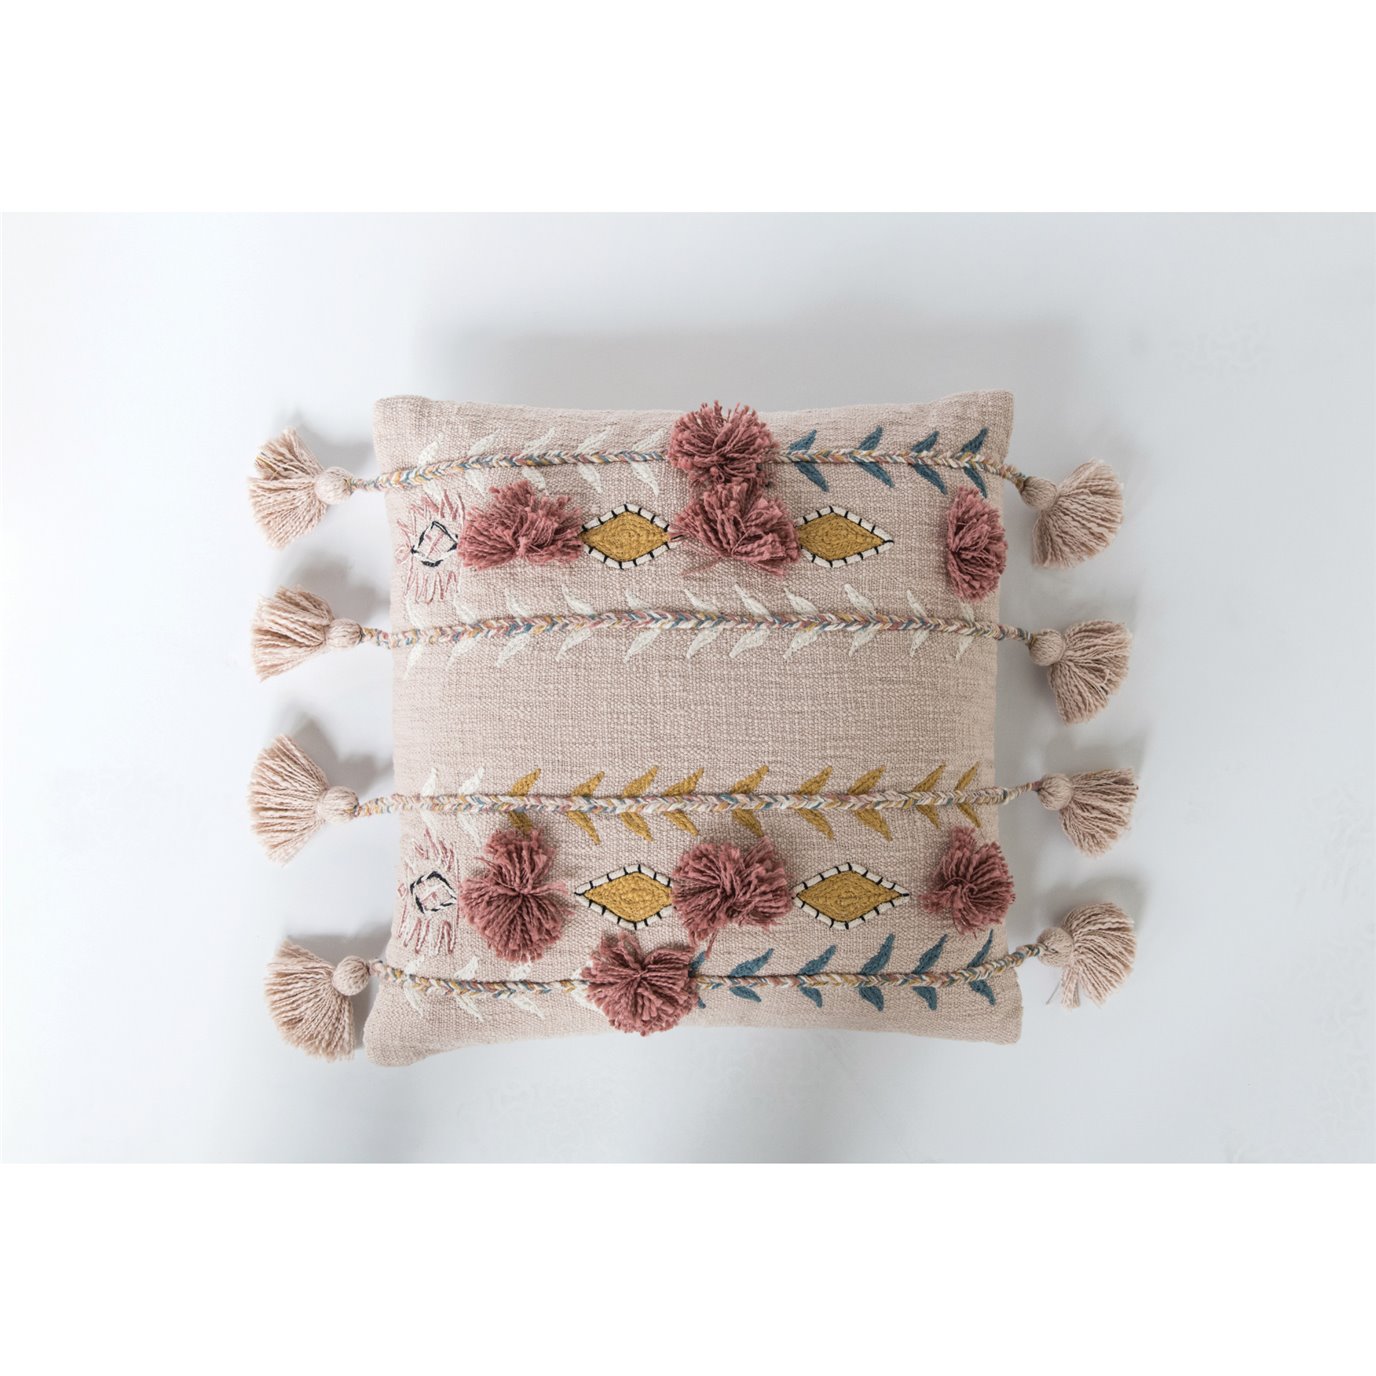 Embroidered & Appliqued Pink Cotton Pillow with Pom Poms & Tassels